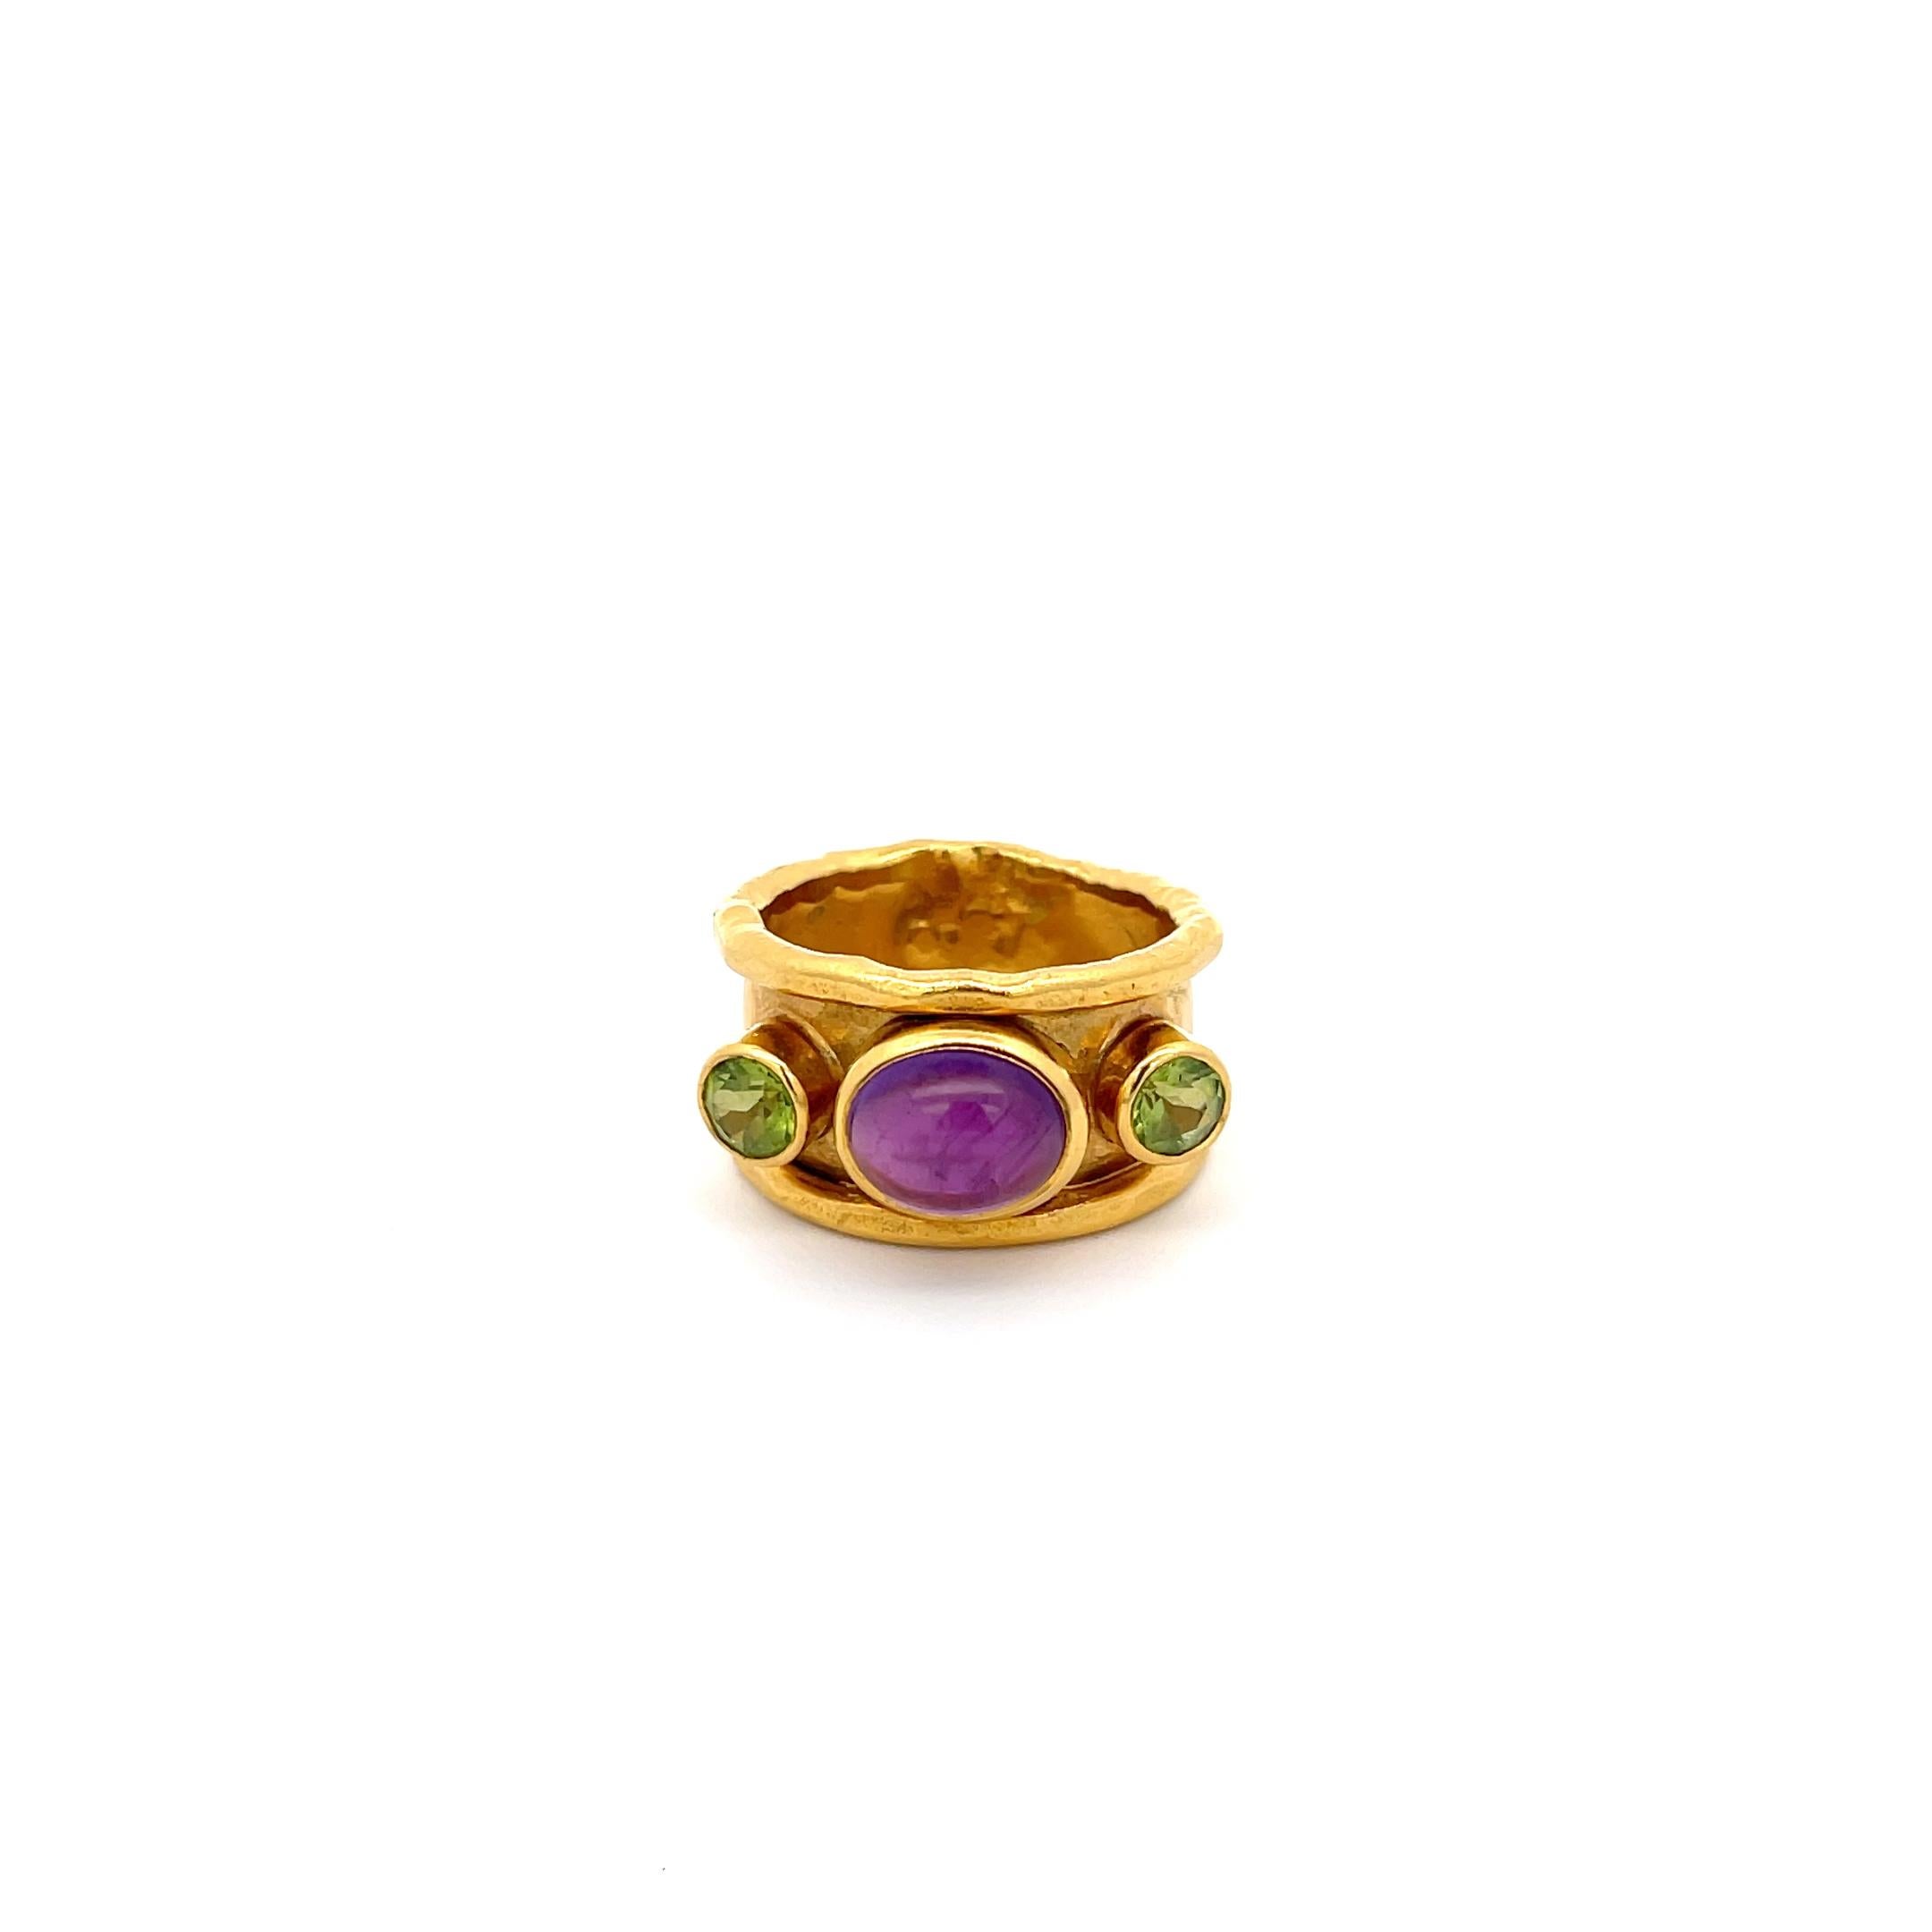 Mahie Amethyst and Peridot Wide Band in 22K Yellow Gold. The band features a cabochon cut amethyst accented by two round cut peridots on each side. The band is 13.5mm wide, weighs 17.9 grams, and is a size 8 1/2.